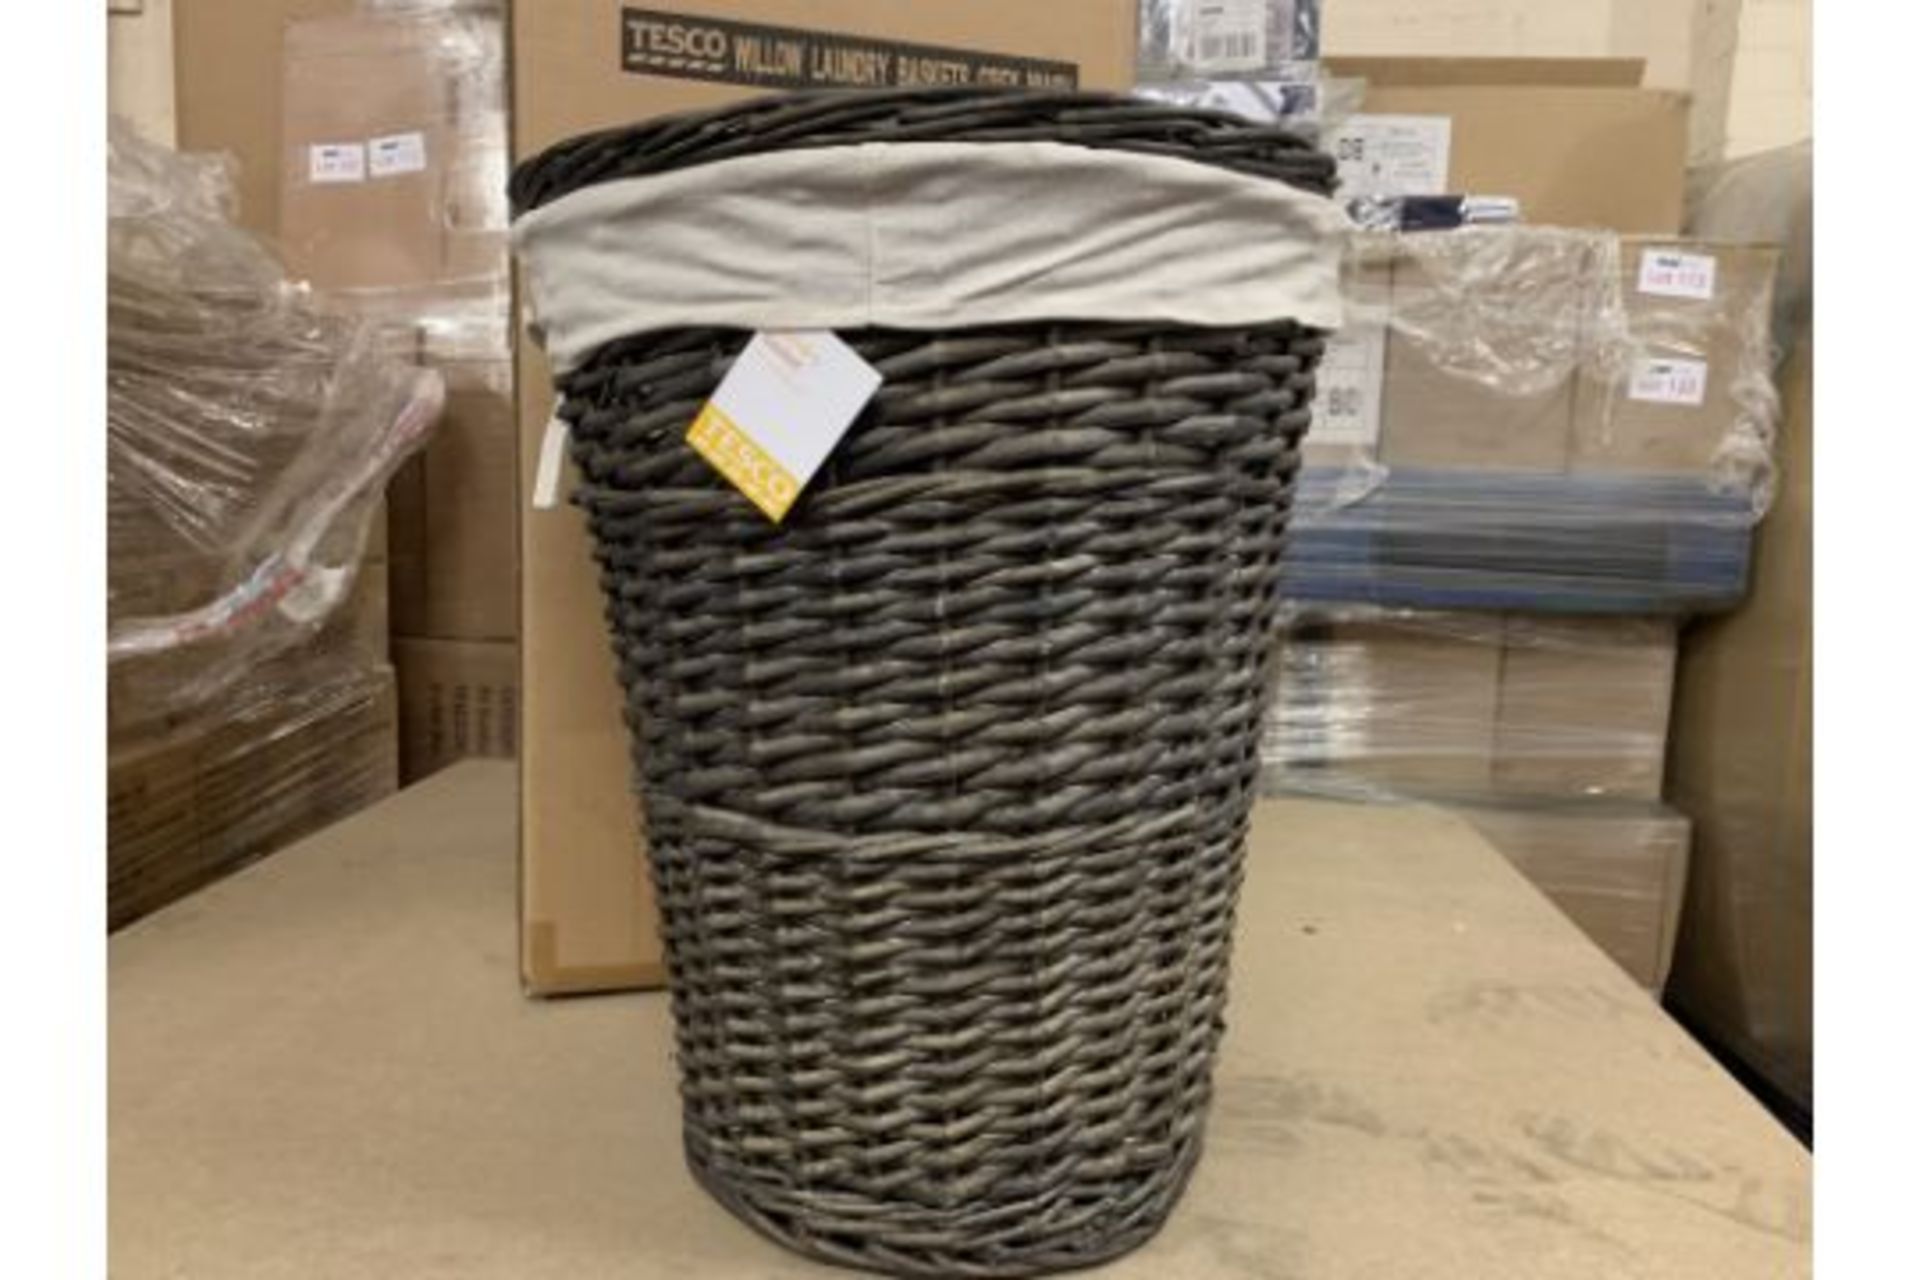 4 X BRAND NEW GREY WASH WILLOW LAUNDRY BASKETS IN 2 BOXES